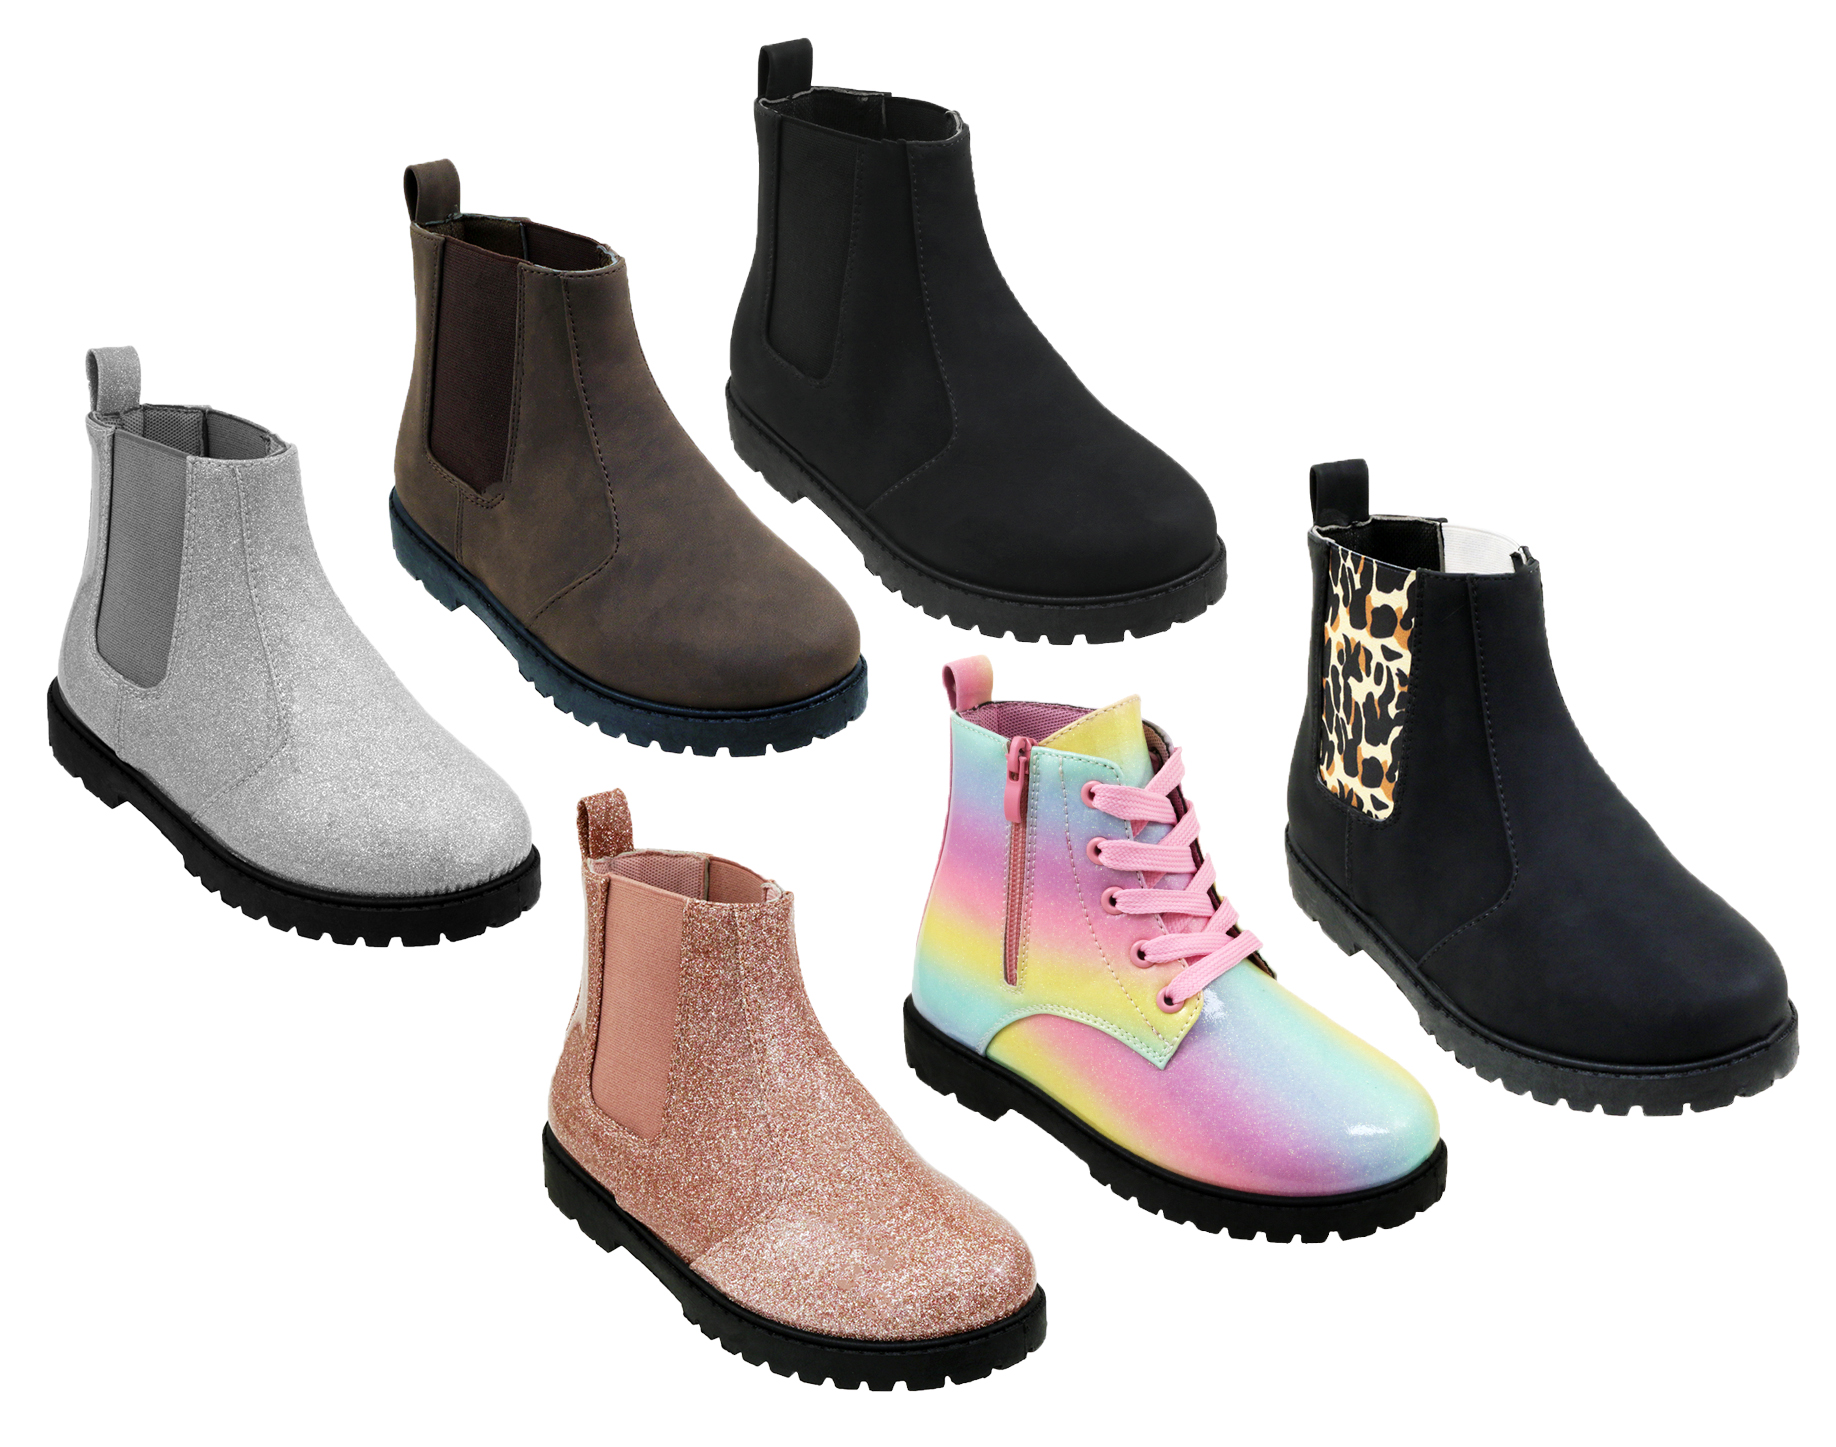 Girl's Slip-On & Laced Chelsea BOOTS w/ Elastic & Zipper - Choose Your Color(s) & Style(s)